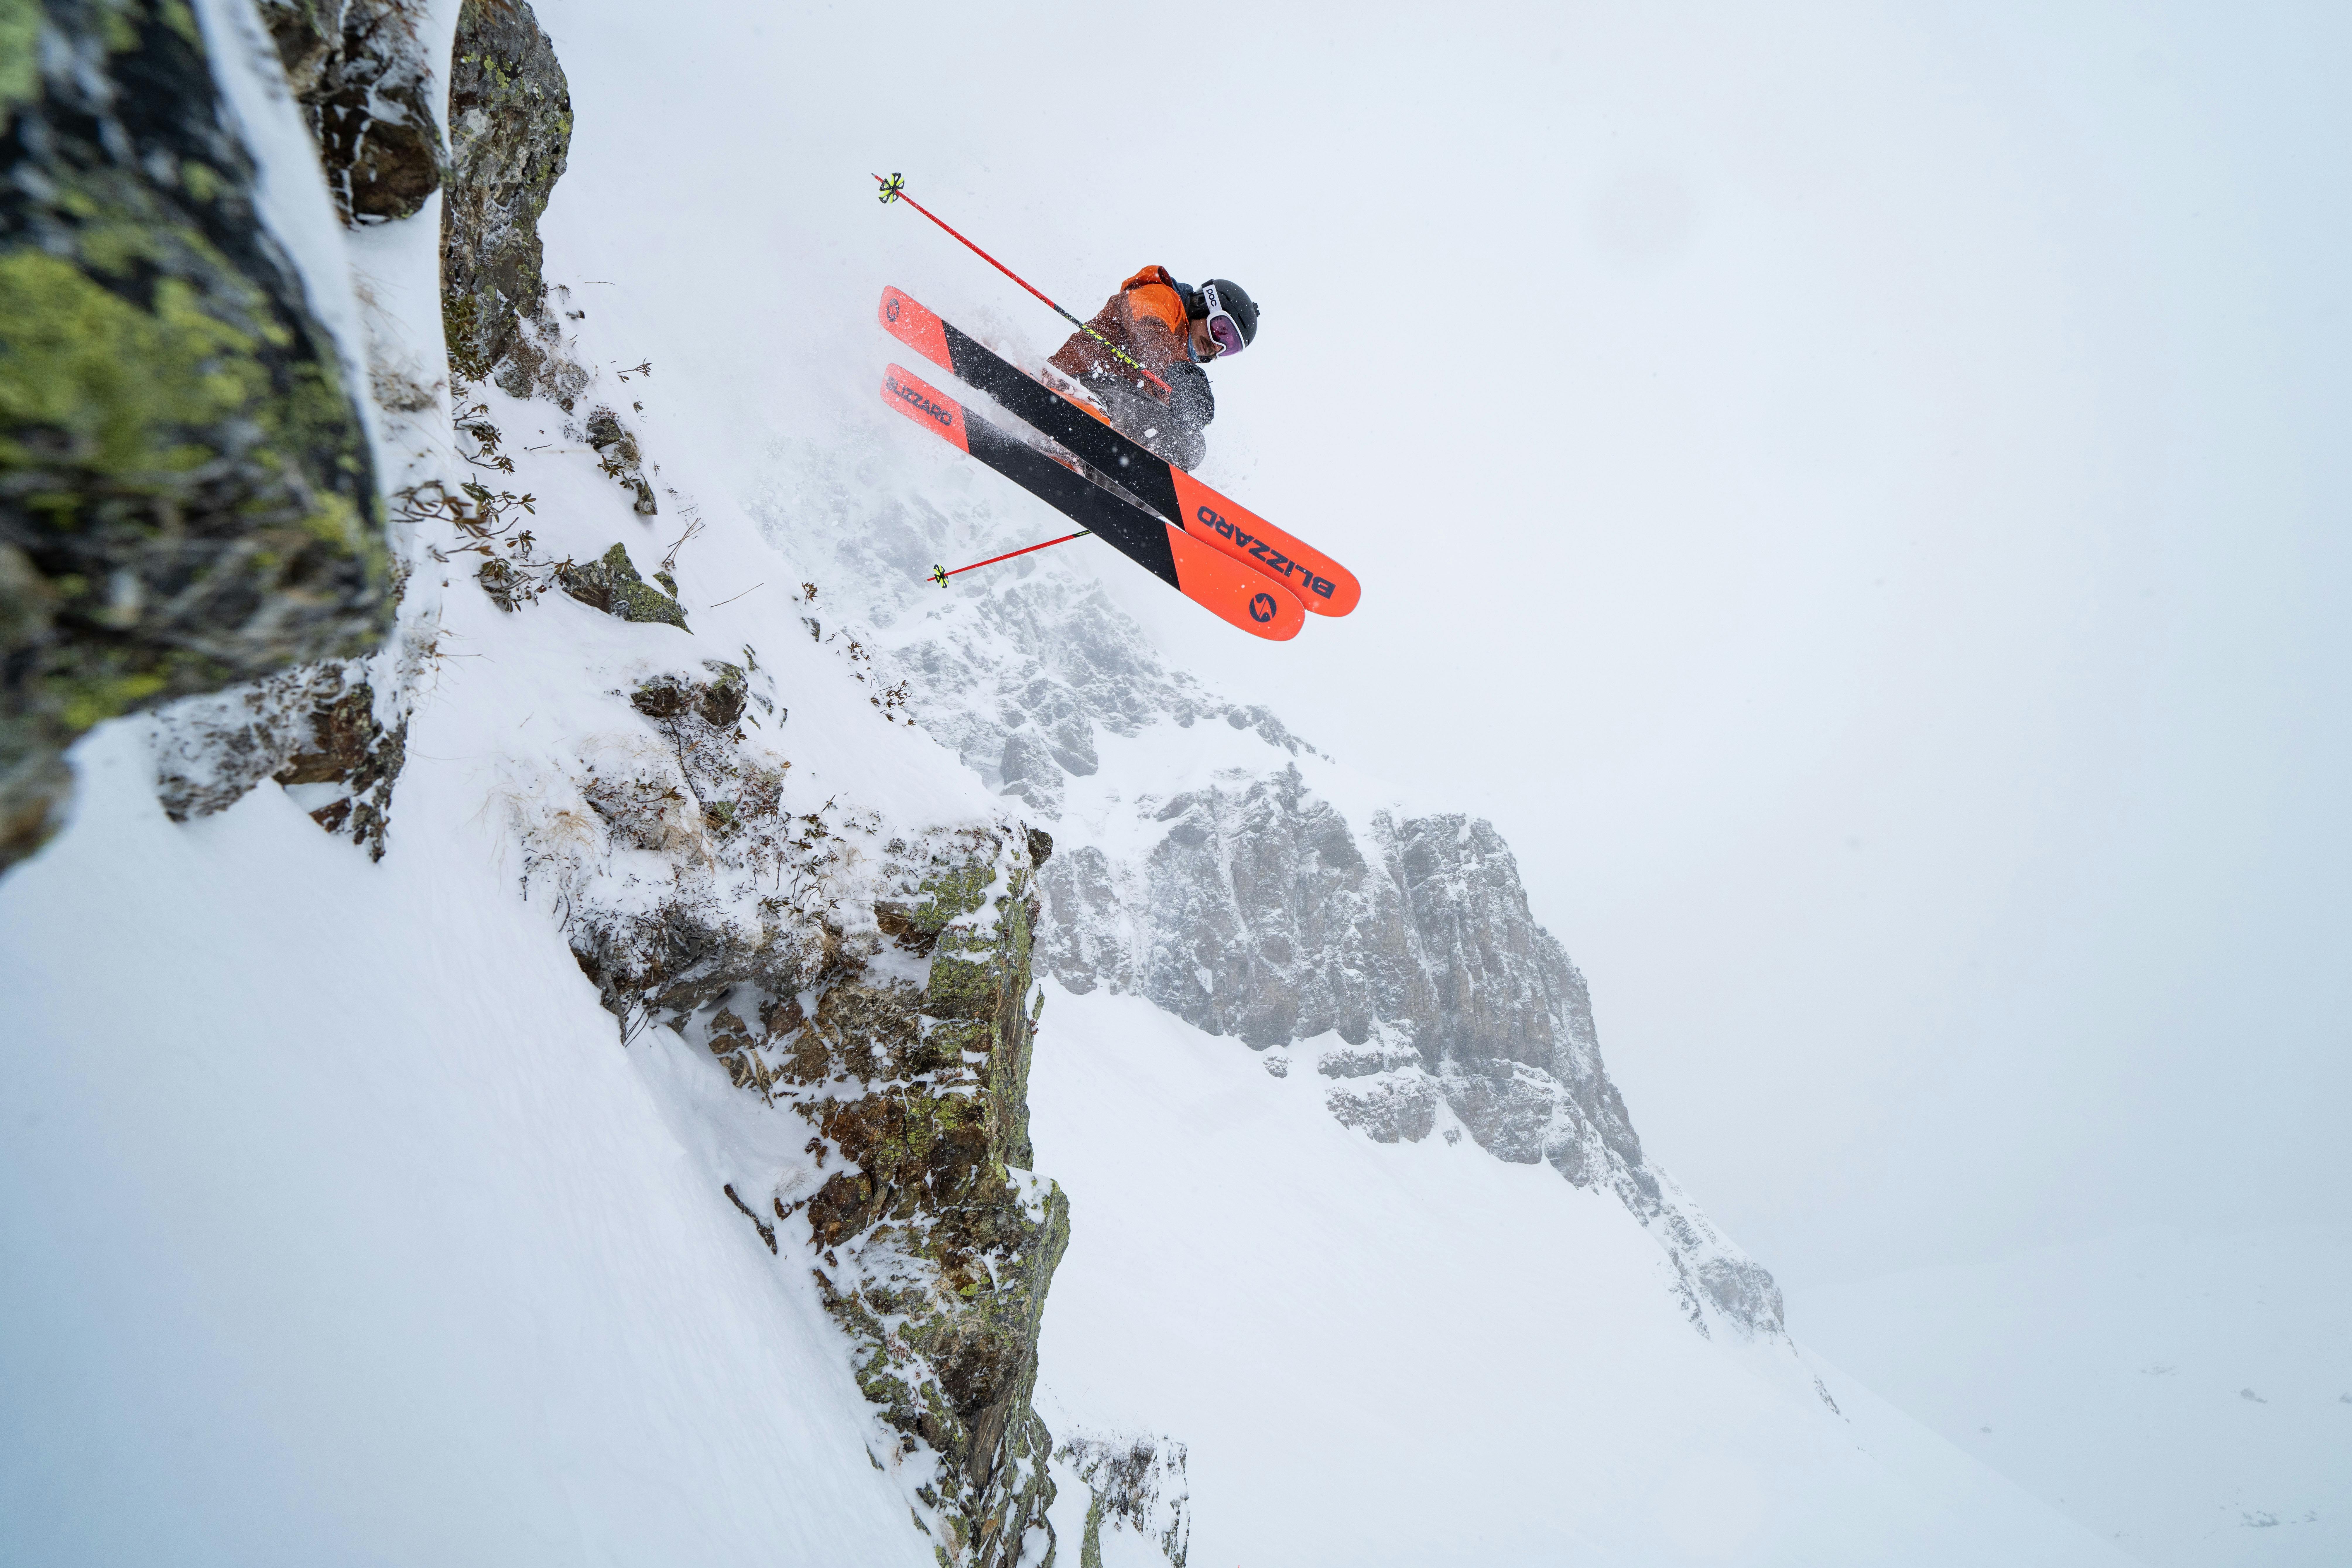 A skier jumping off a snowy cliff with bright orange and black Blizzard skis